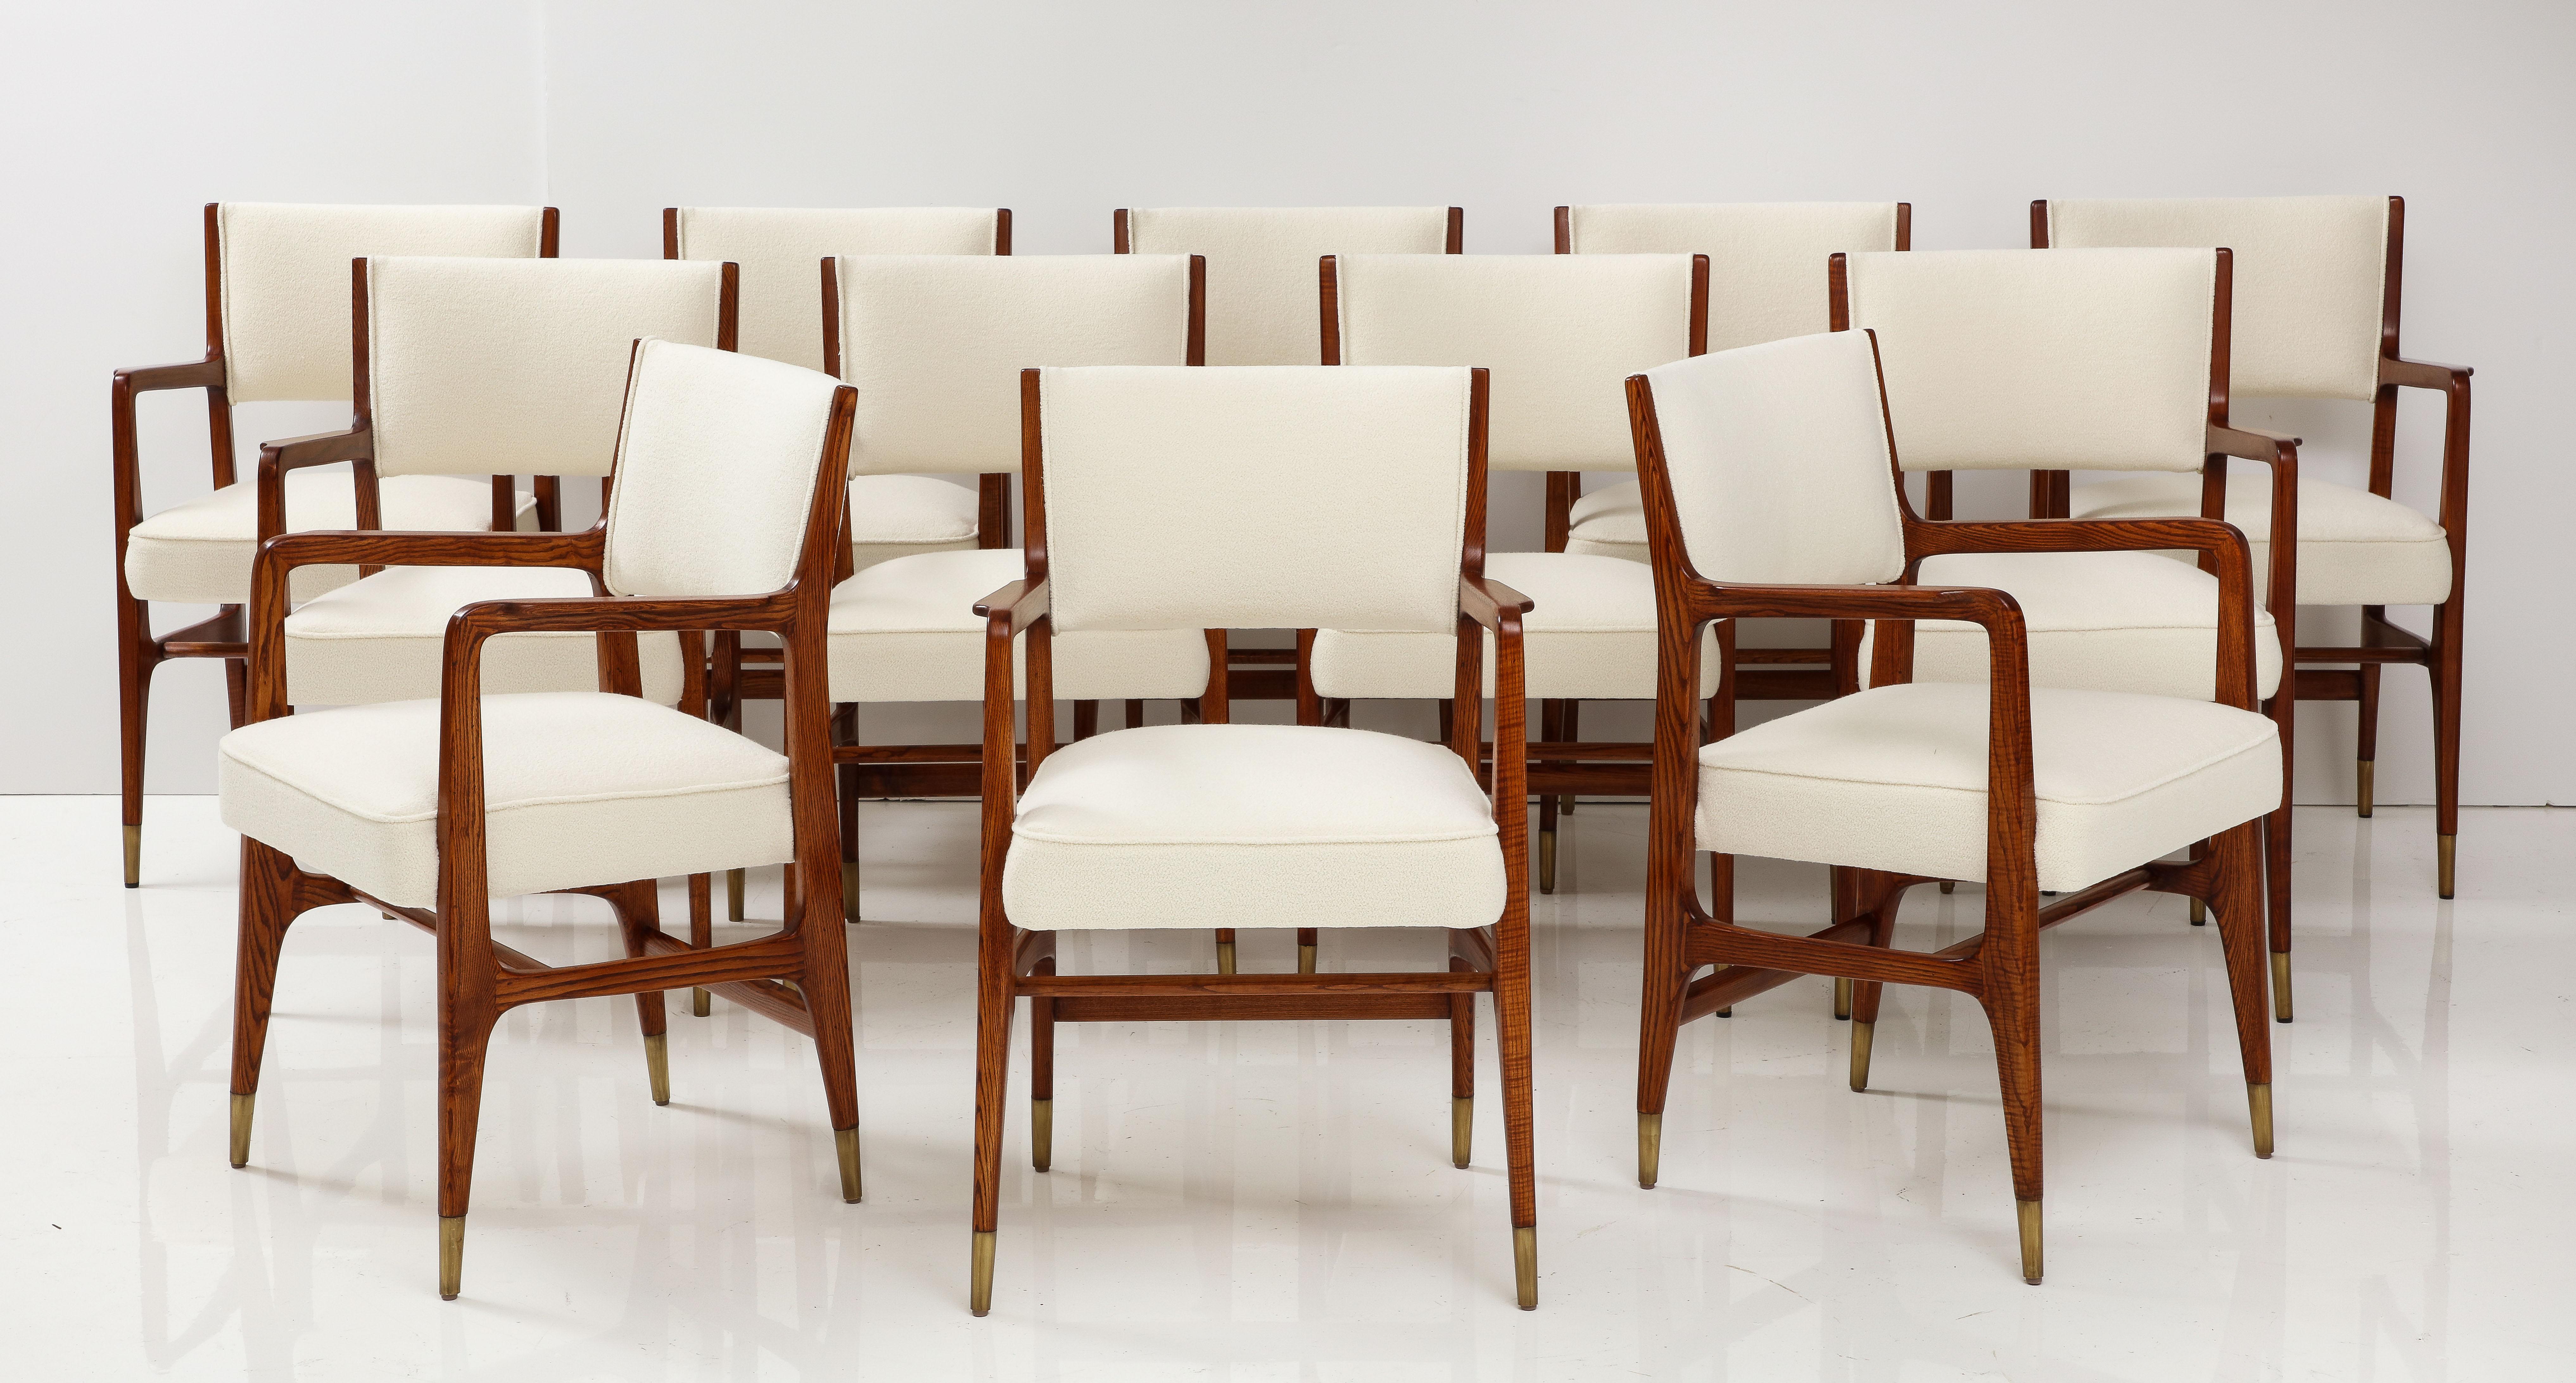 Gio Ponti for Cassina rare matched set of 12 dining chairs model 110 with oak frames, upholstered seat and back in ivory bouclé, and ending in brass sabots, Italy, 1950s.  These Ponti classic architectural armchairs have sculptural curved armrests,